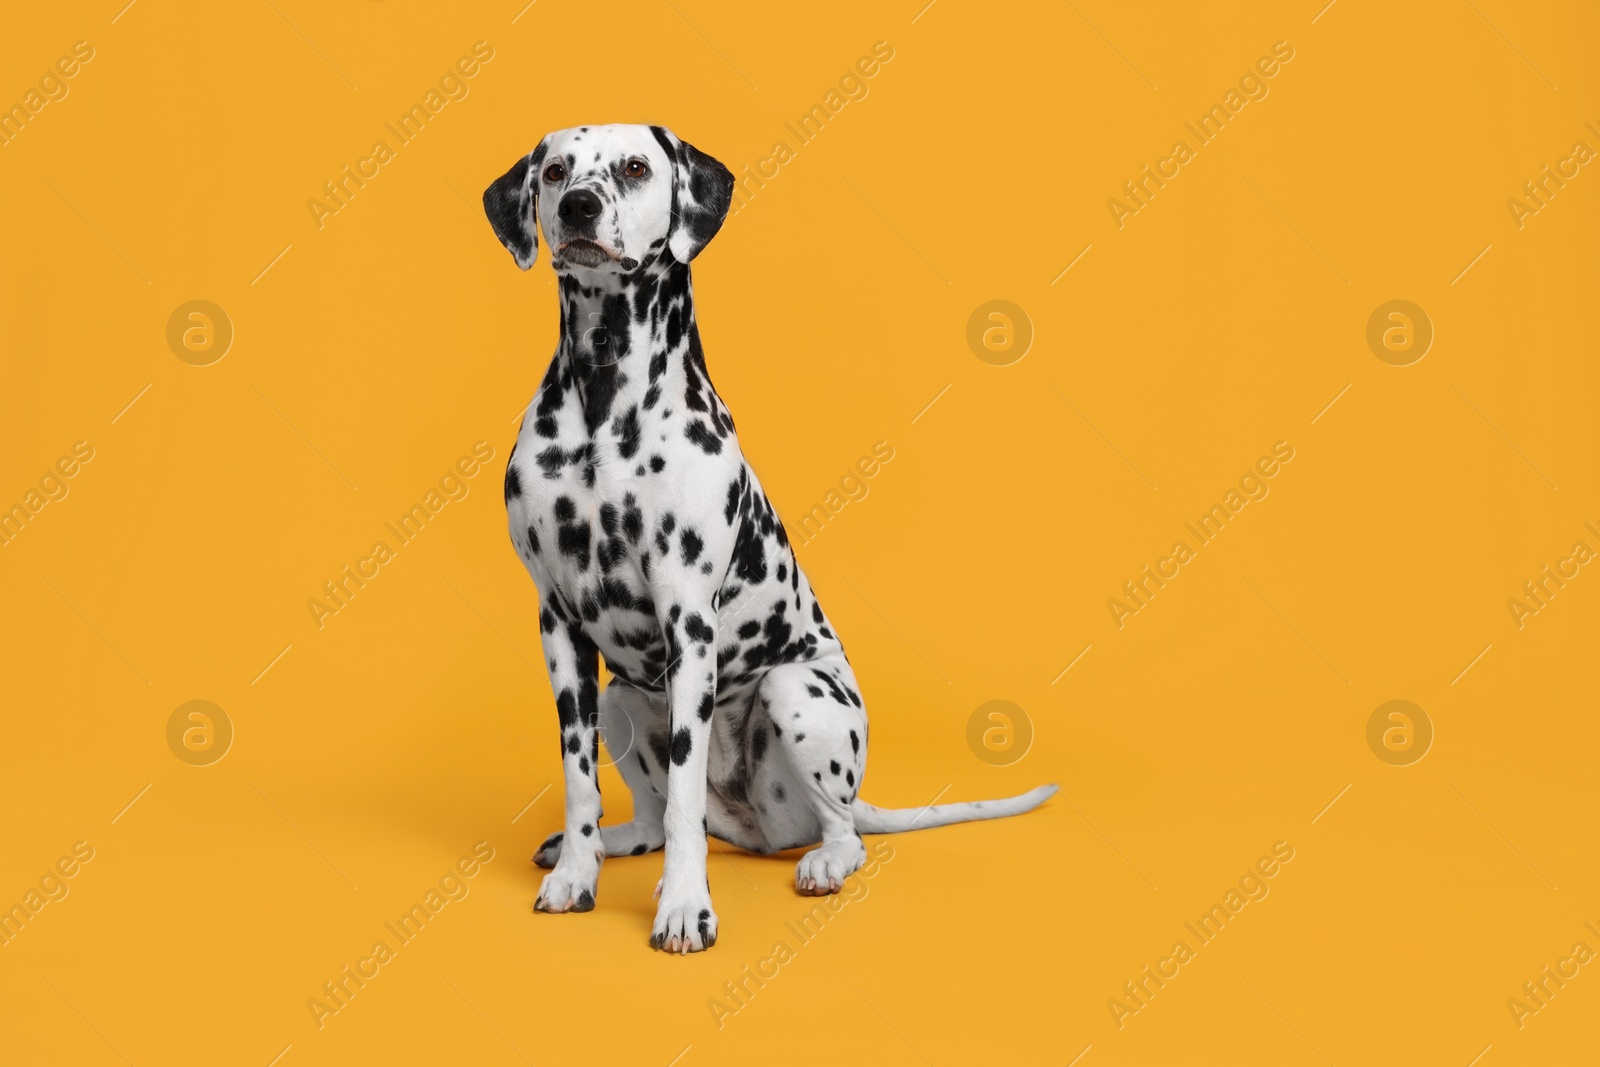 Photo of Adorable Dalmatian dog on yellow background. Lovely pet